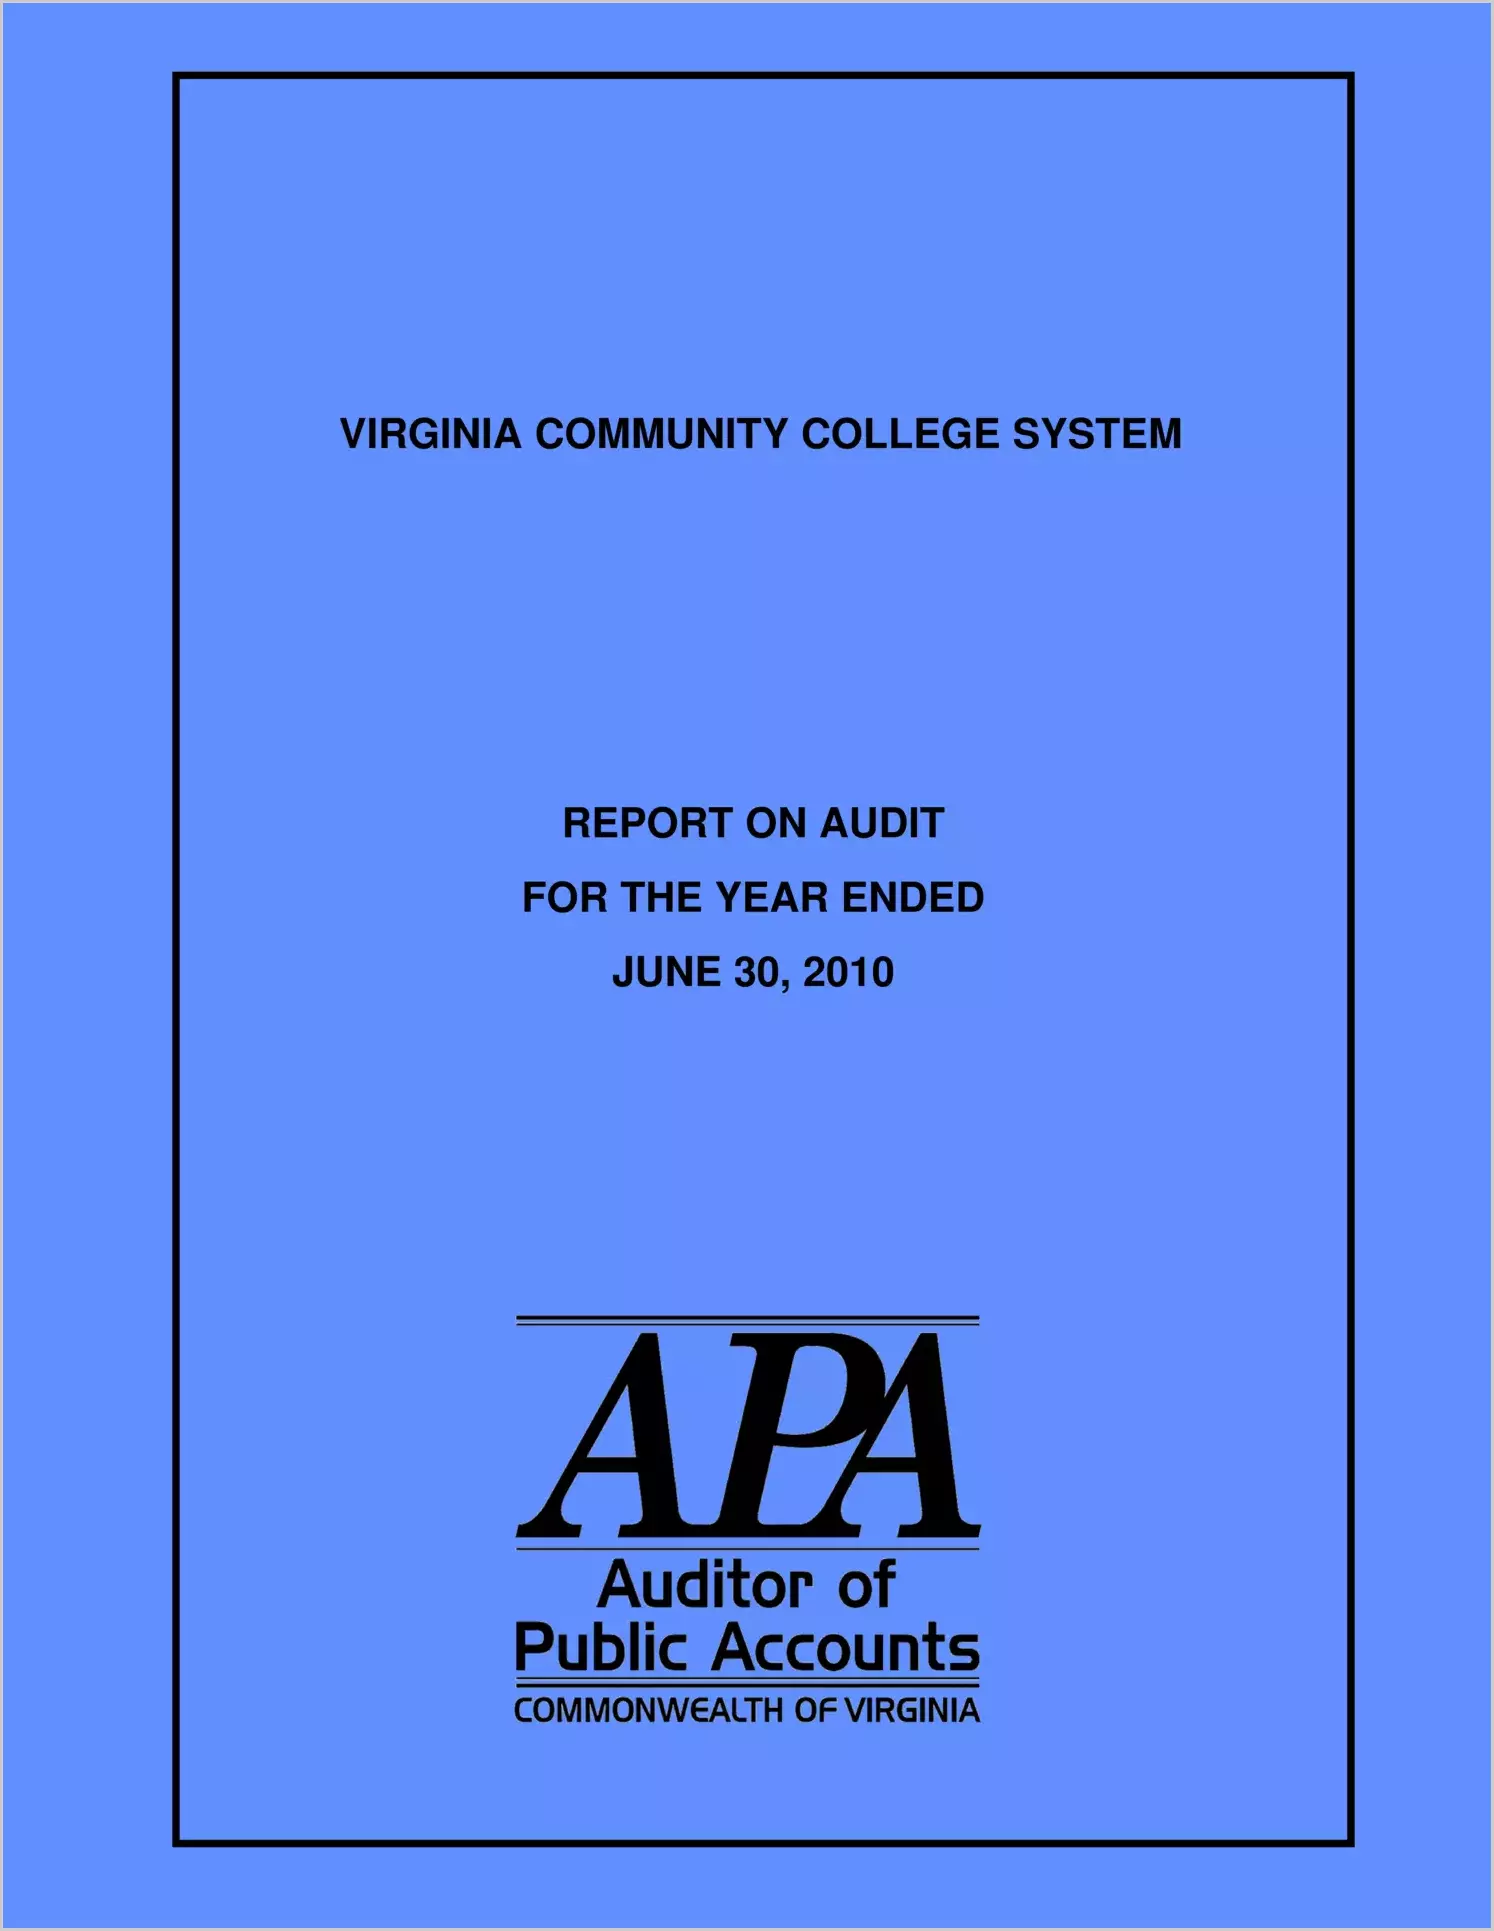 Virginia Community College System for the year ended June 30, 2010